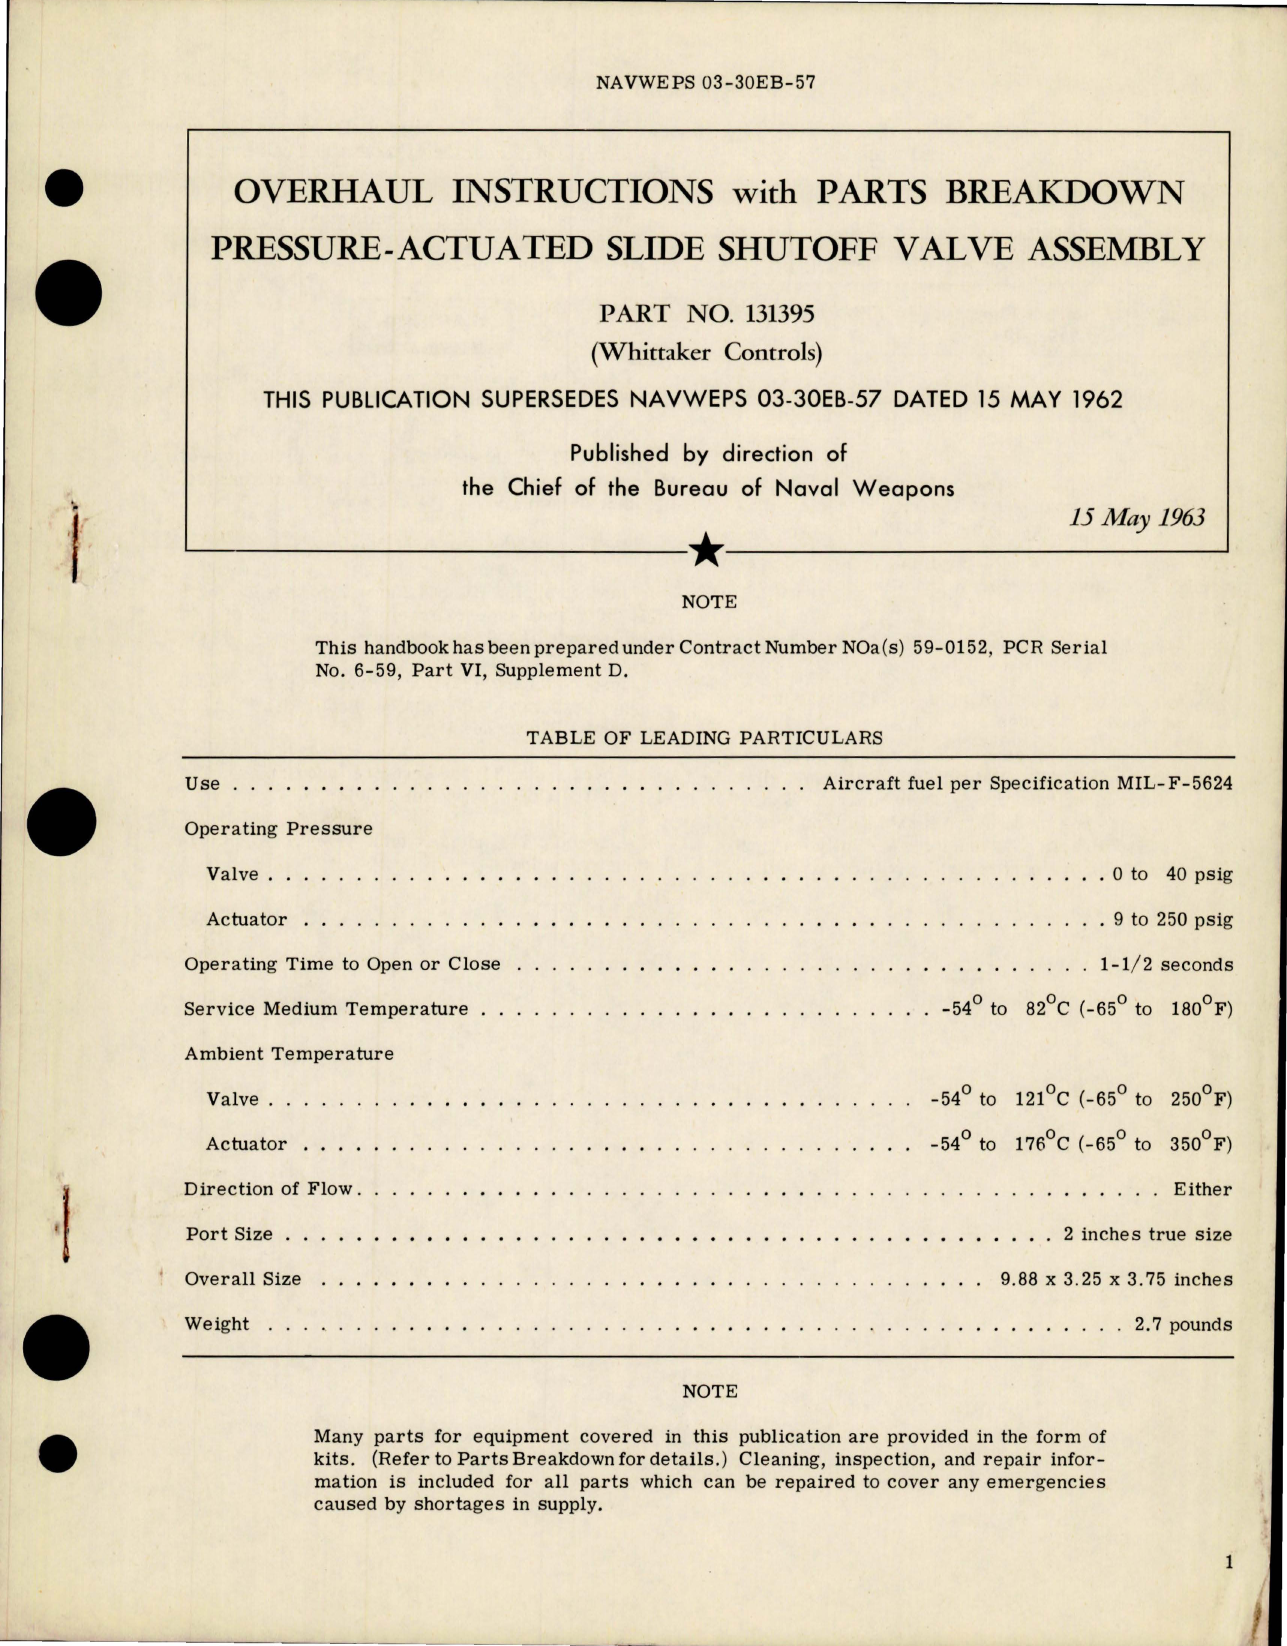 Sample page 1 from AirCorps Library document: Overhaul Instructions with Parts for Pressure Actuated Slide Shutoff Valve Assembly - Part 131395 